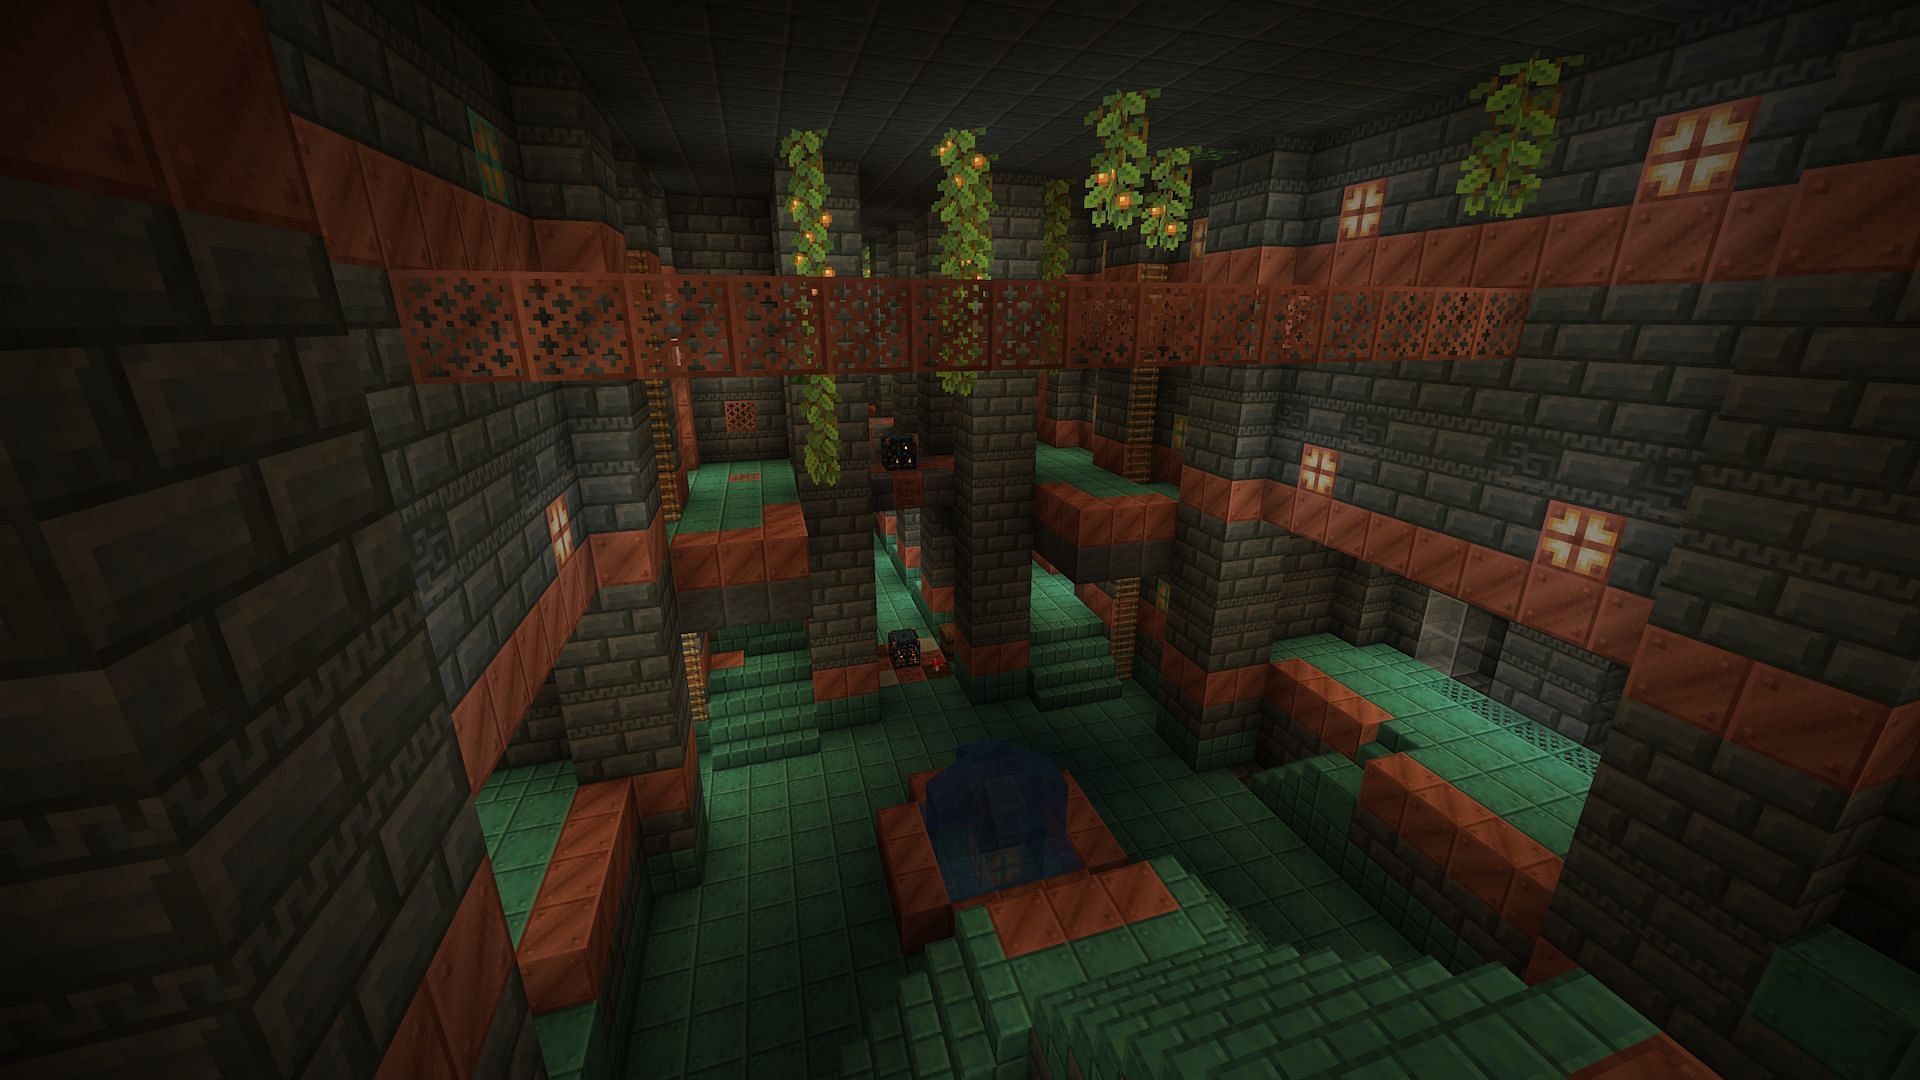 Trial chambers are great for seeing most of the new blocks (Image via Mojang)